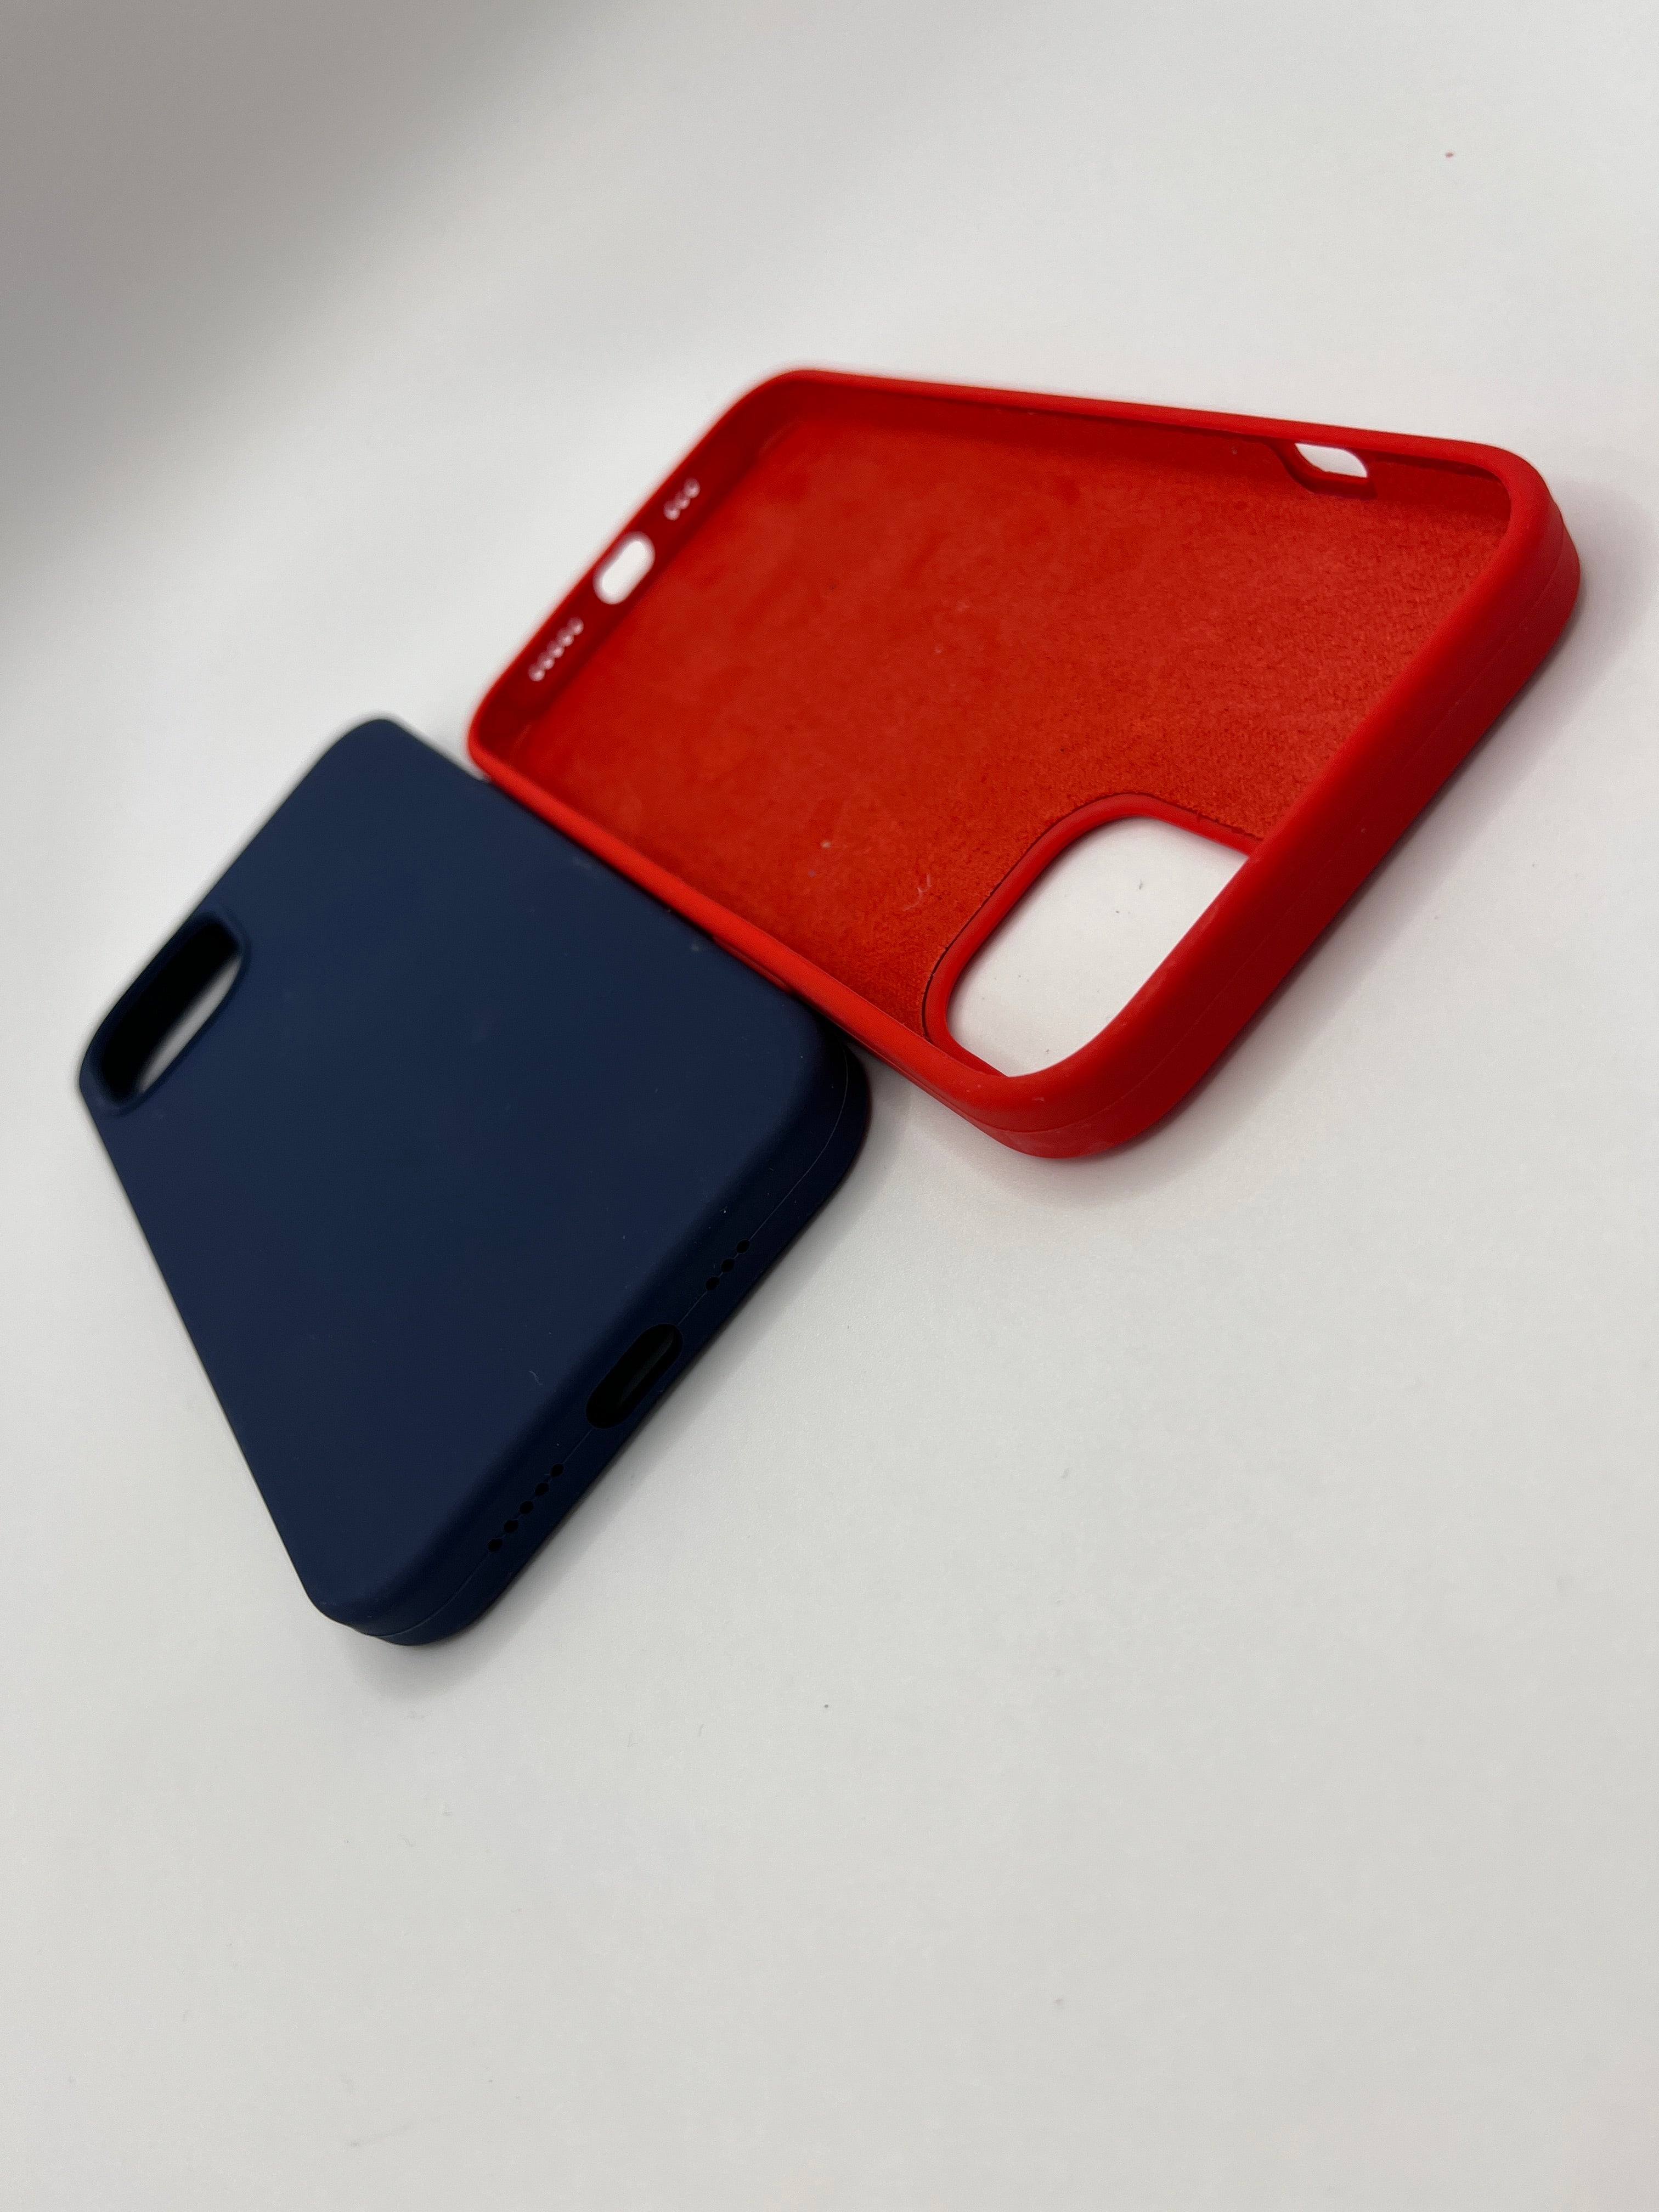 iPhone XS Max Soft Silicone Back Case